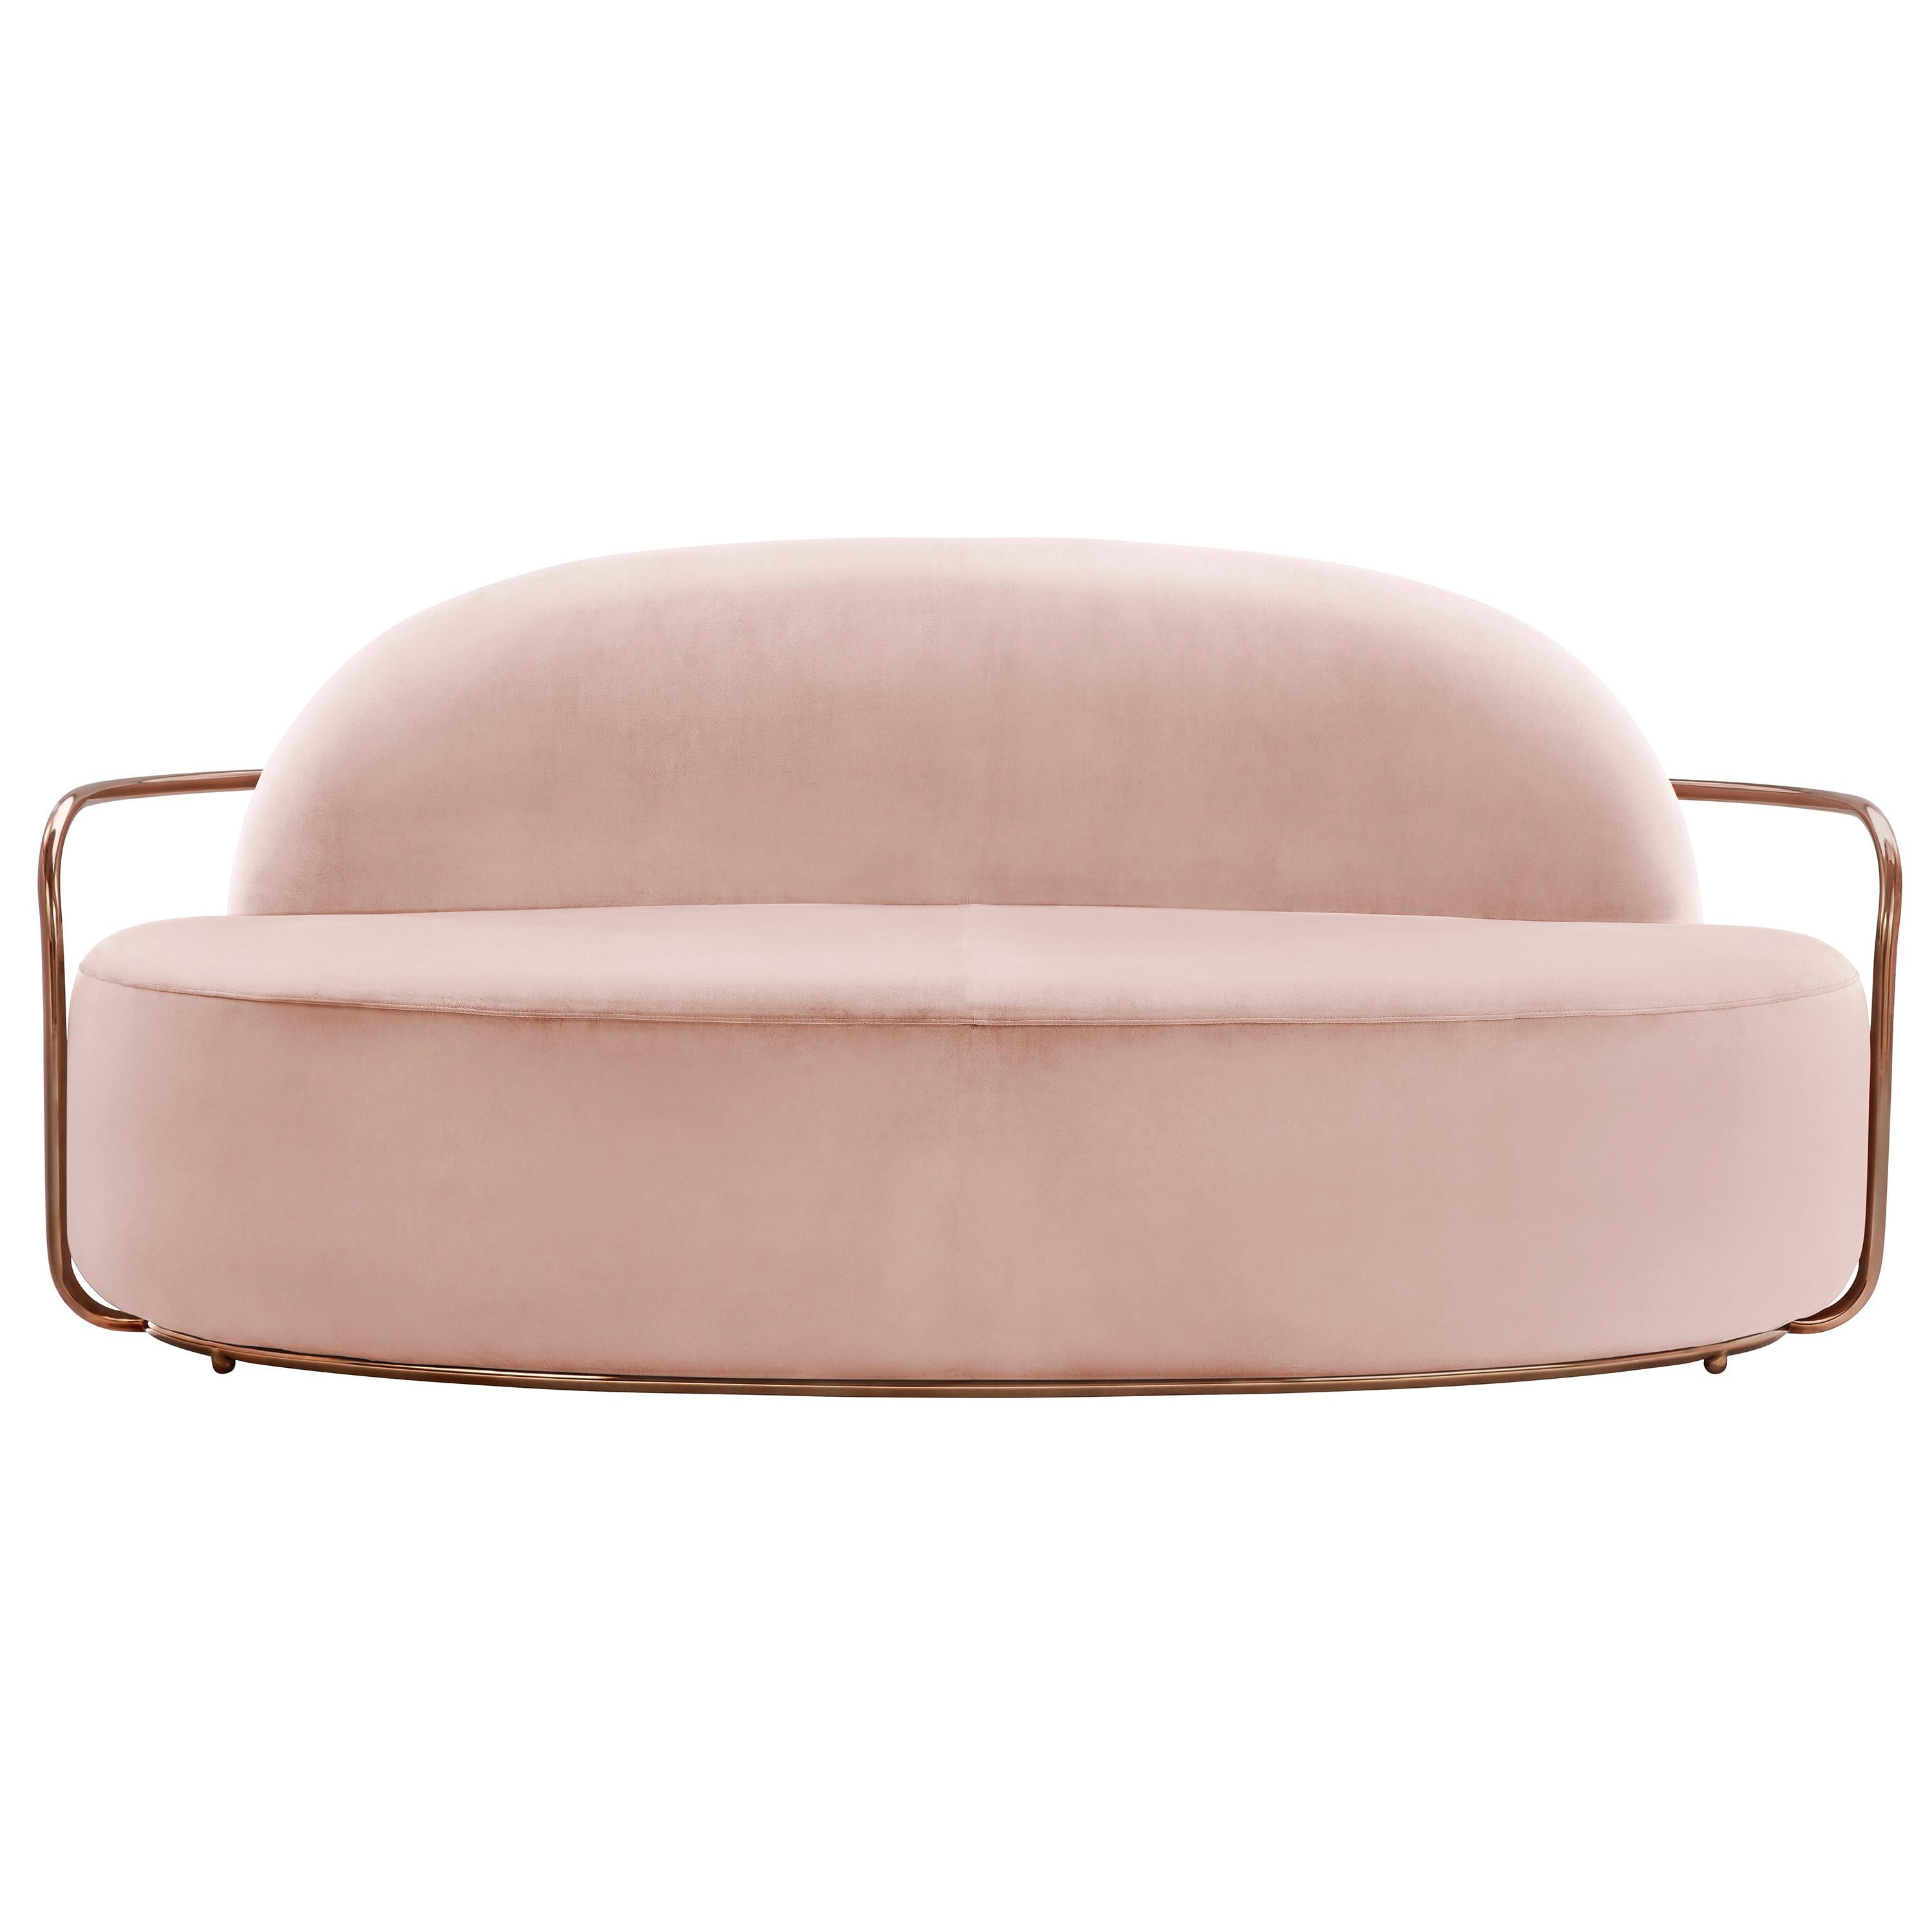 Orion 3 Seat Sofa with Plush Pink Velvet and Rose Gold Arms by Nika Zupanc For Sale